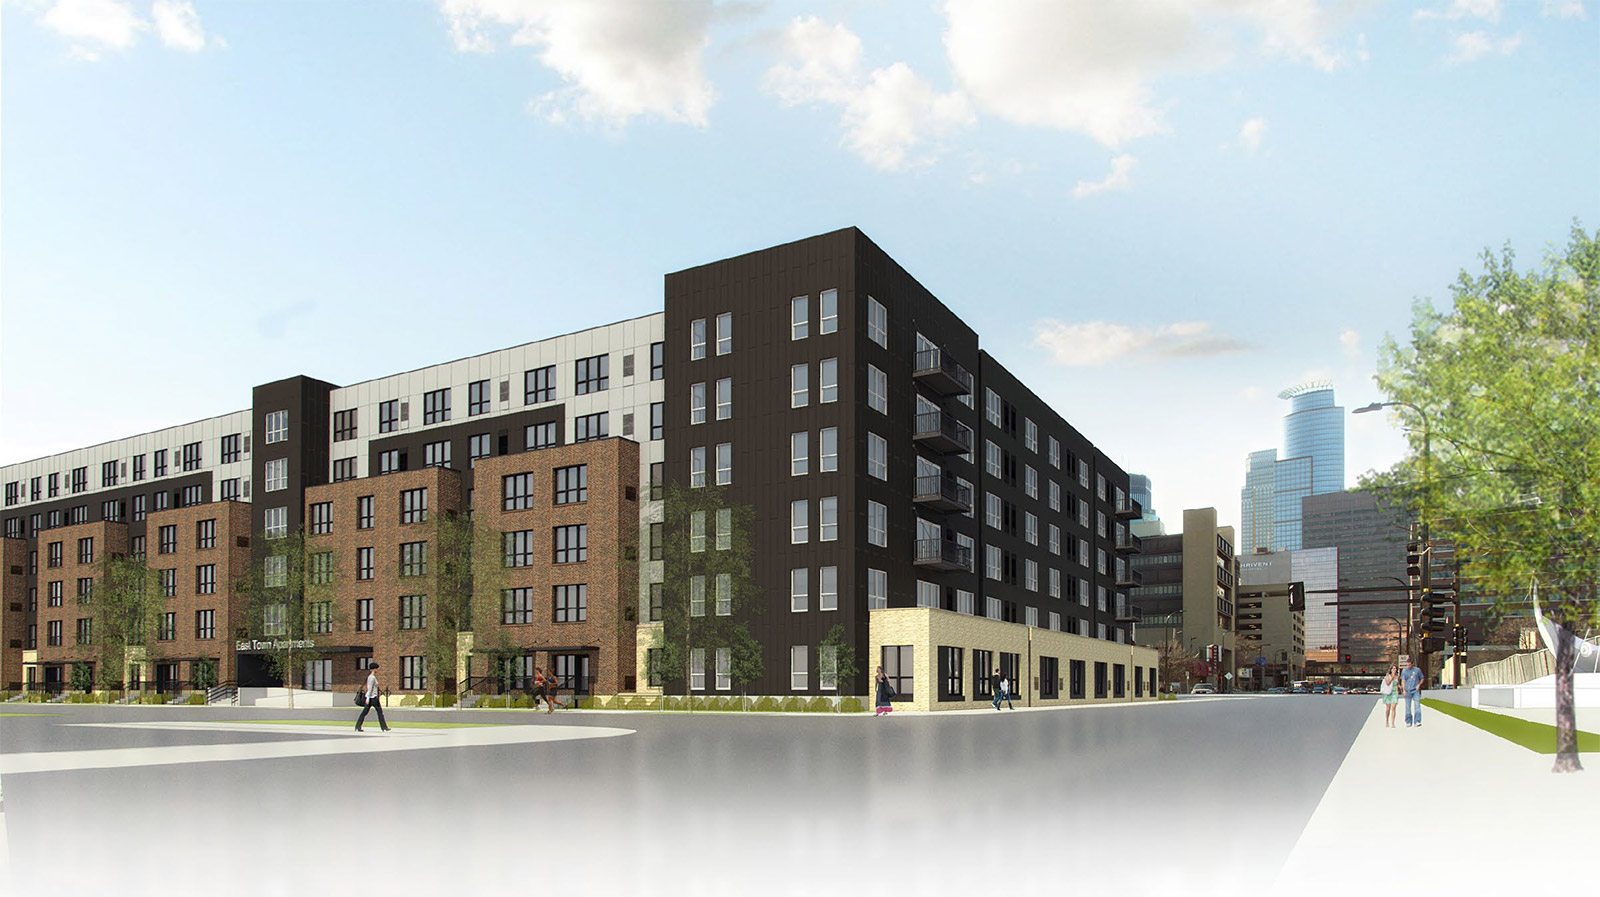 Rendering of the new East Town Apartments with blue sky and fluffy clouds overhead